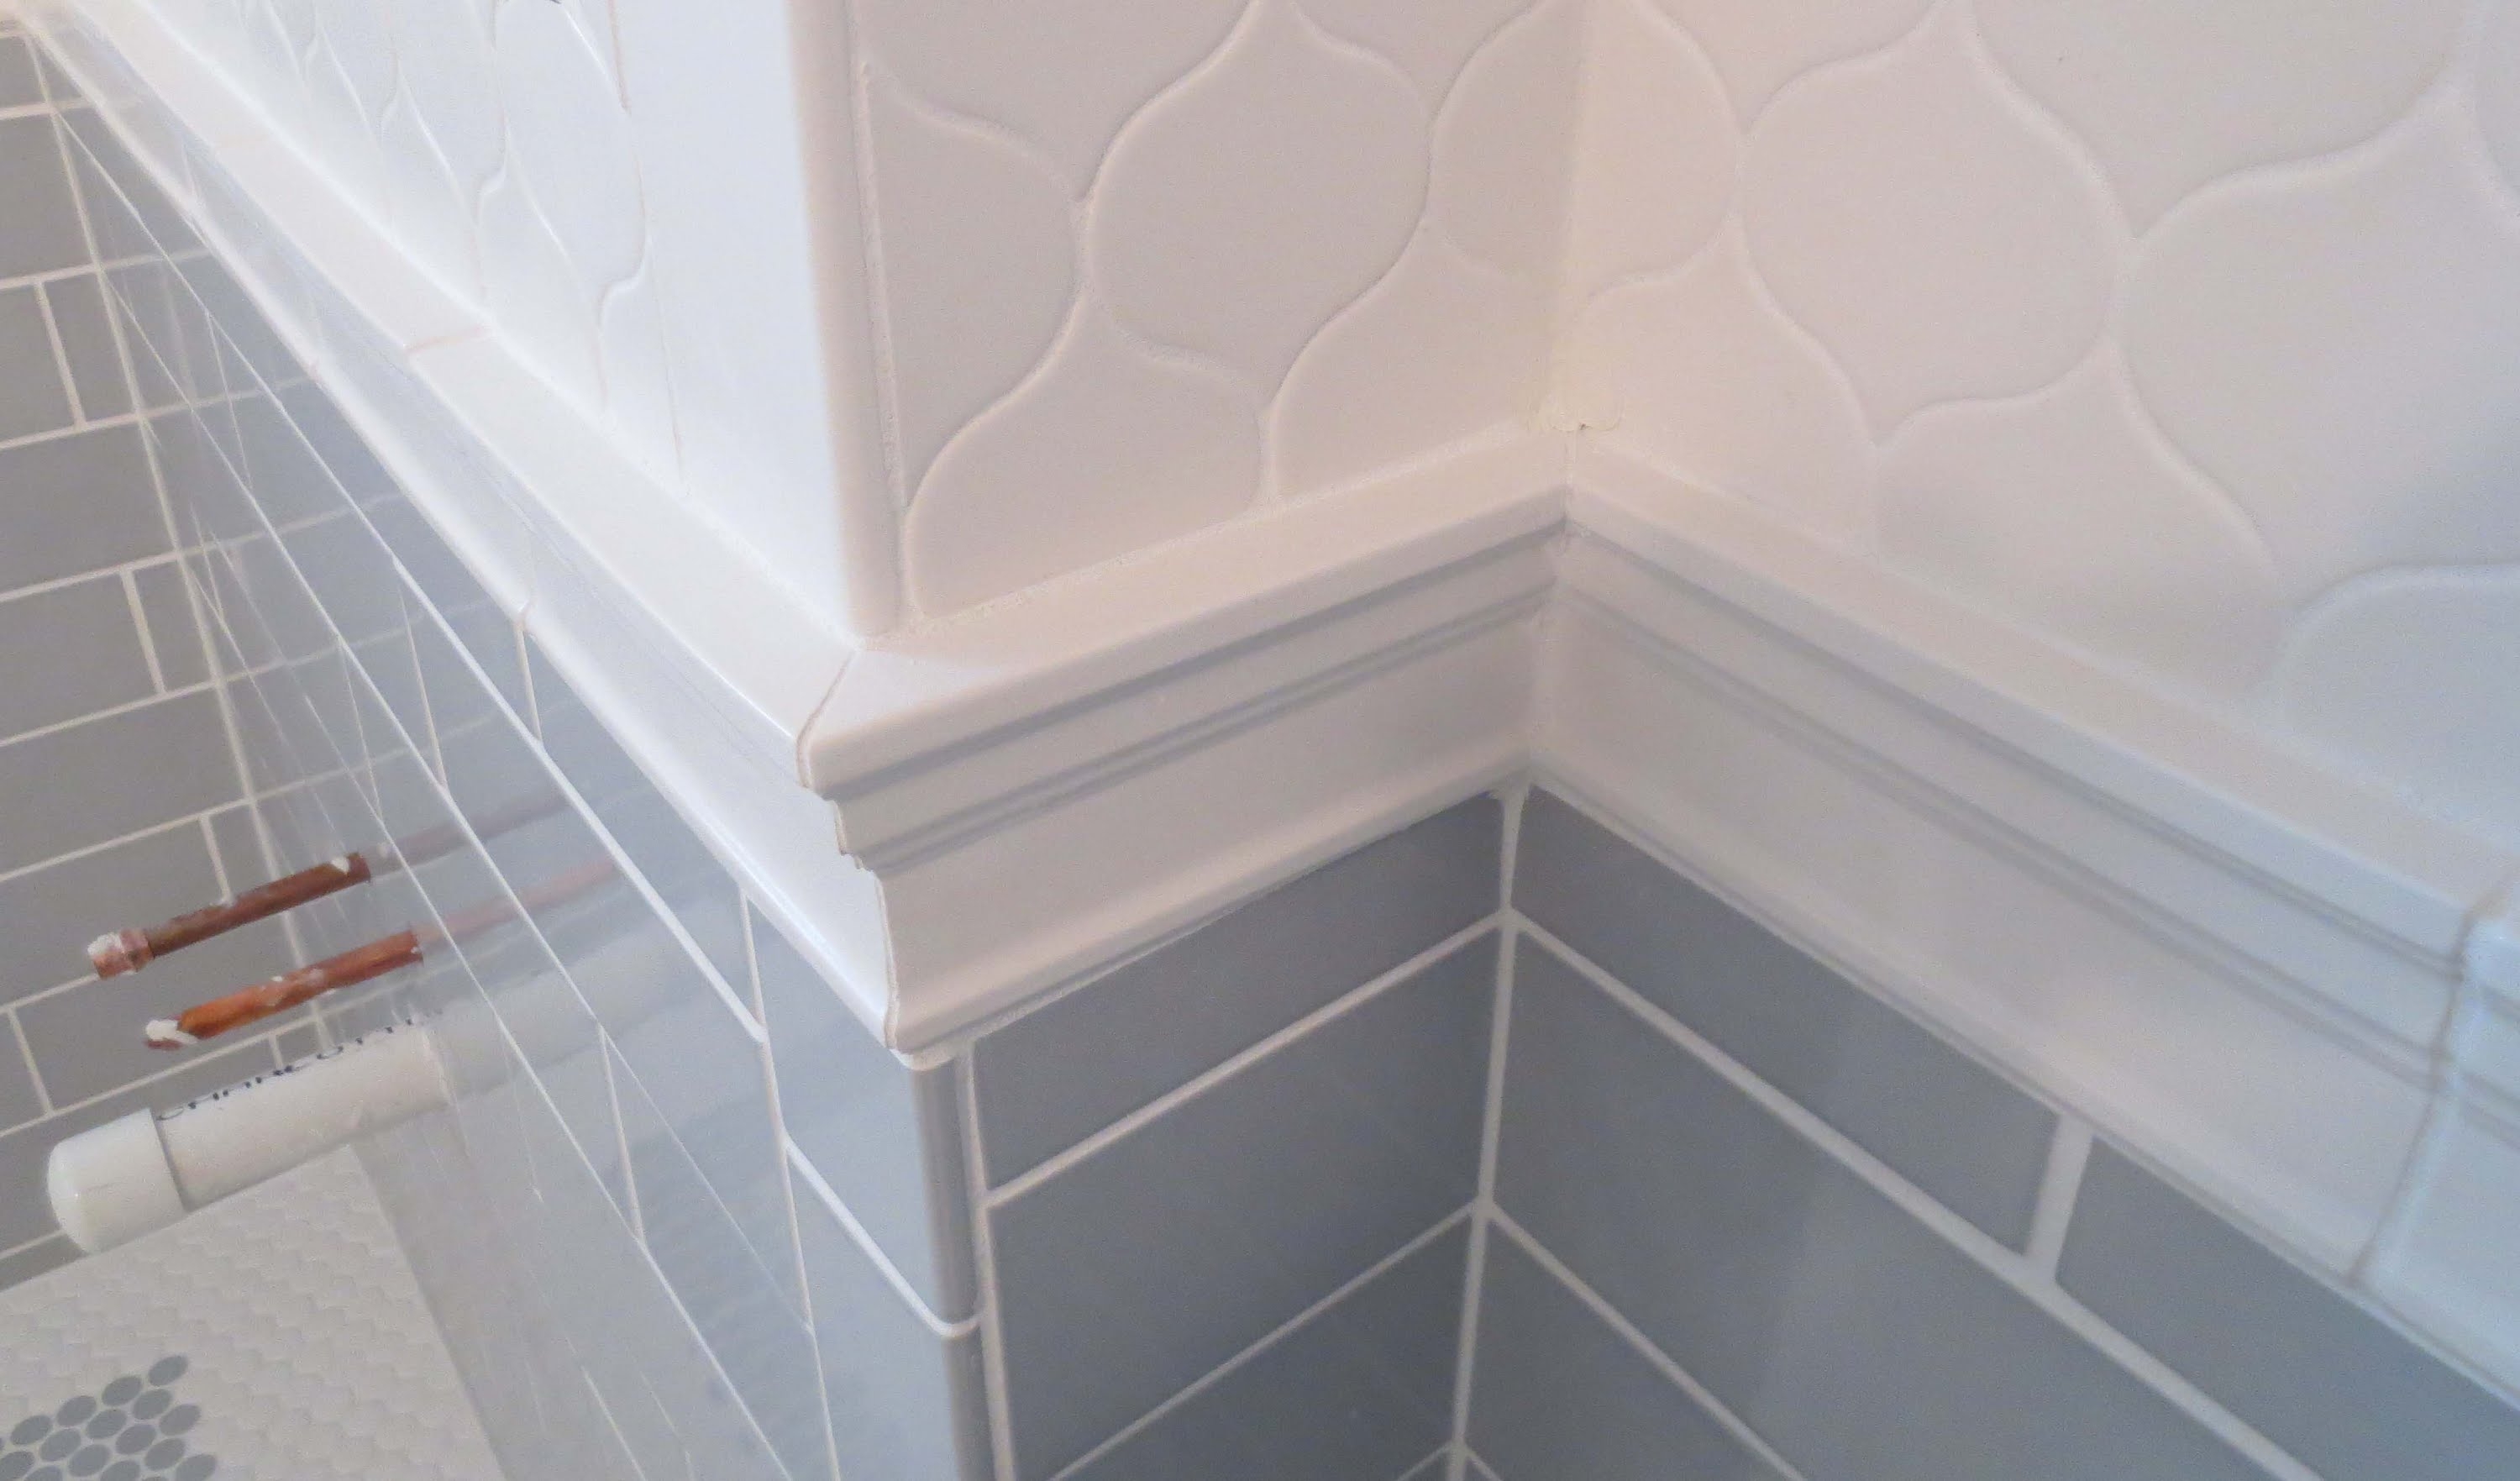 Floor To Ceiling Tiles And Cornice Floor To Ceiling Tiles And Cornice complete bathroom schluter systems products part 5 installing 3000 X 1763